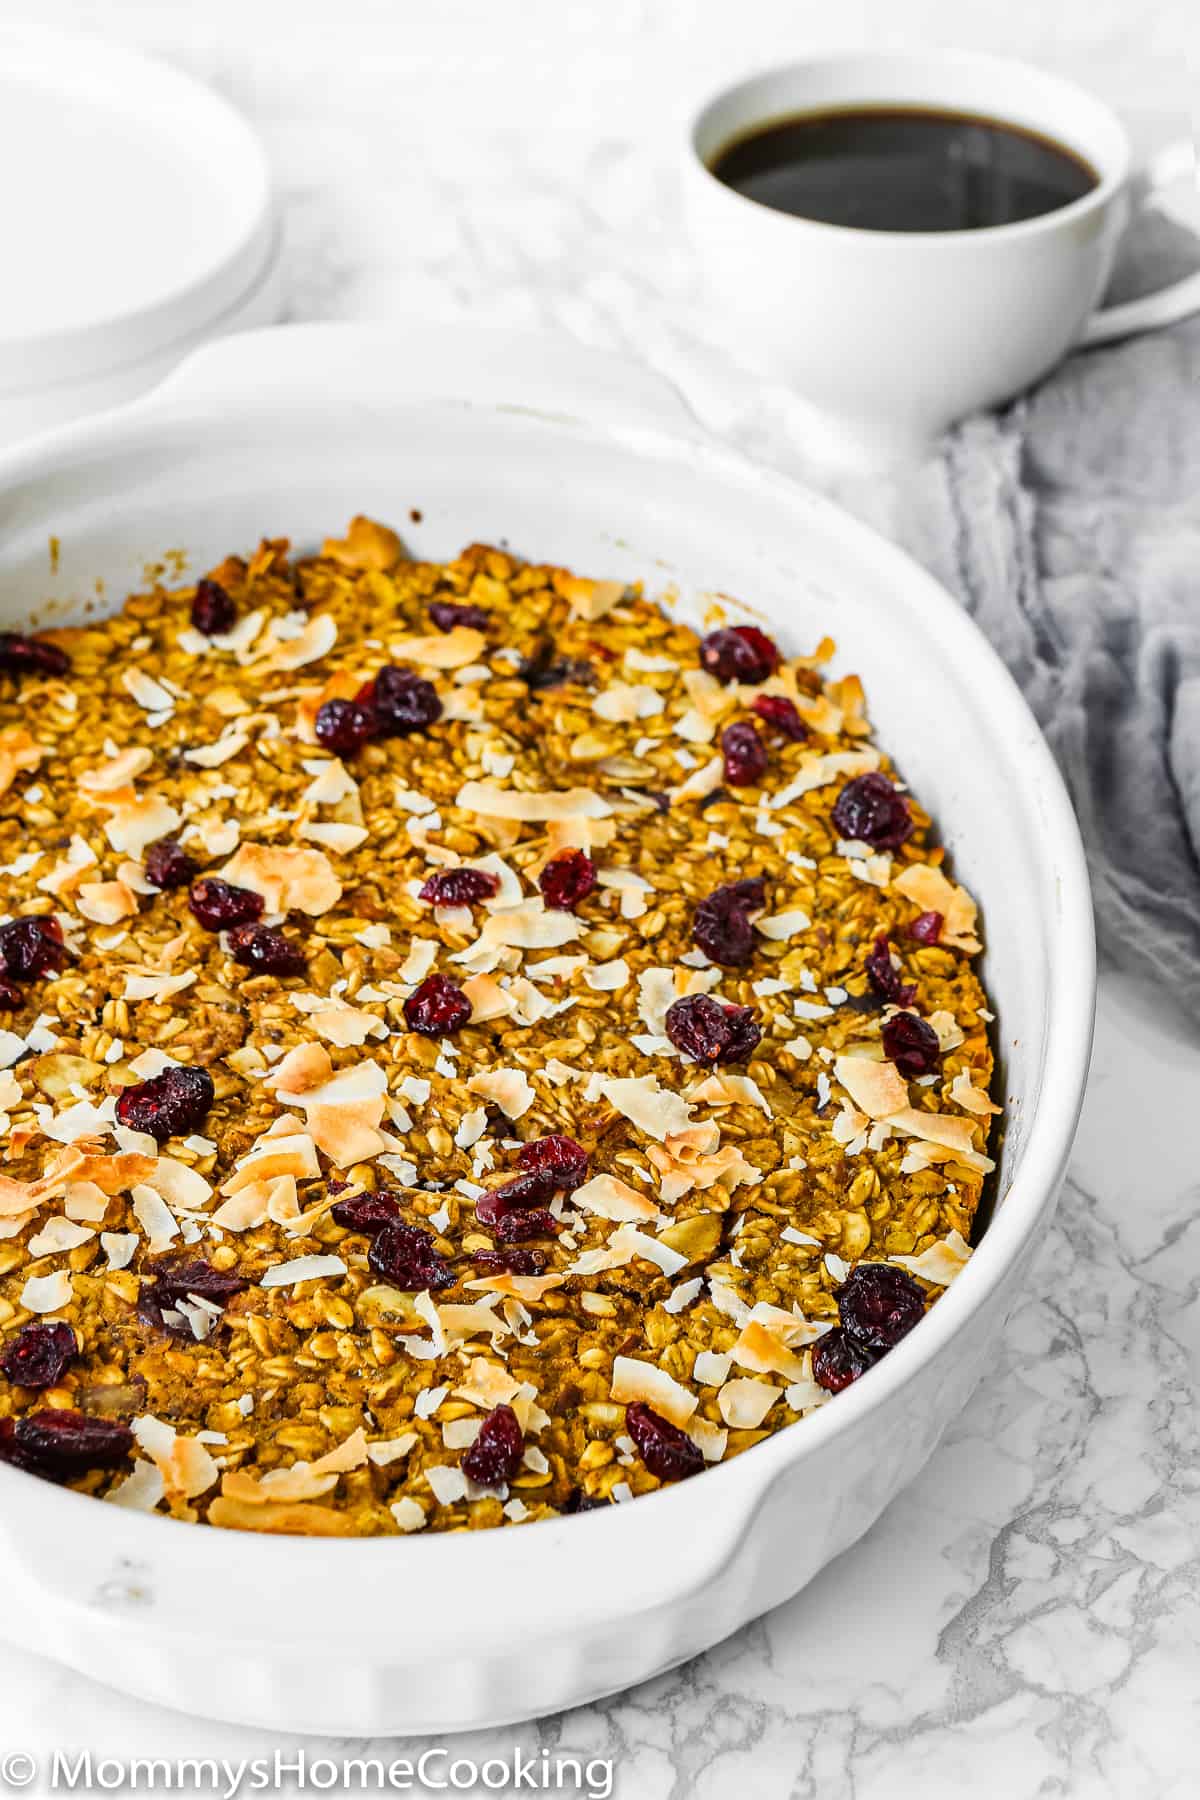  Eggless Pumpkin Baked Oatmeal with cranberries on top